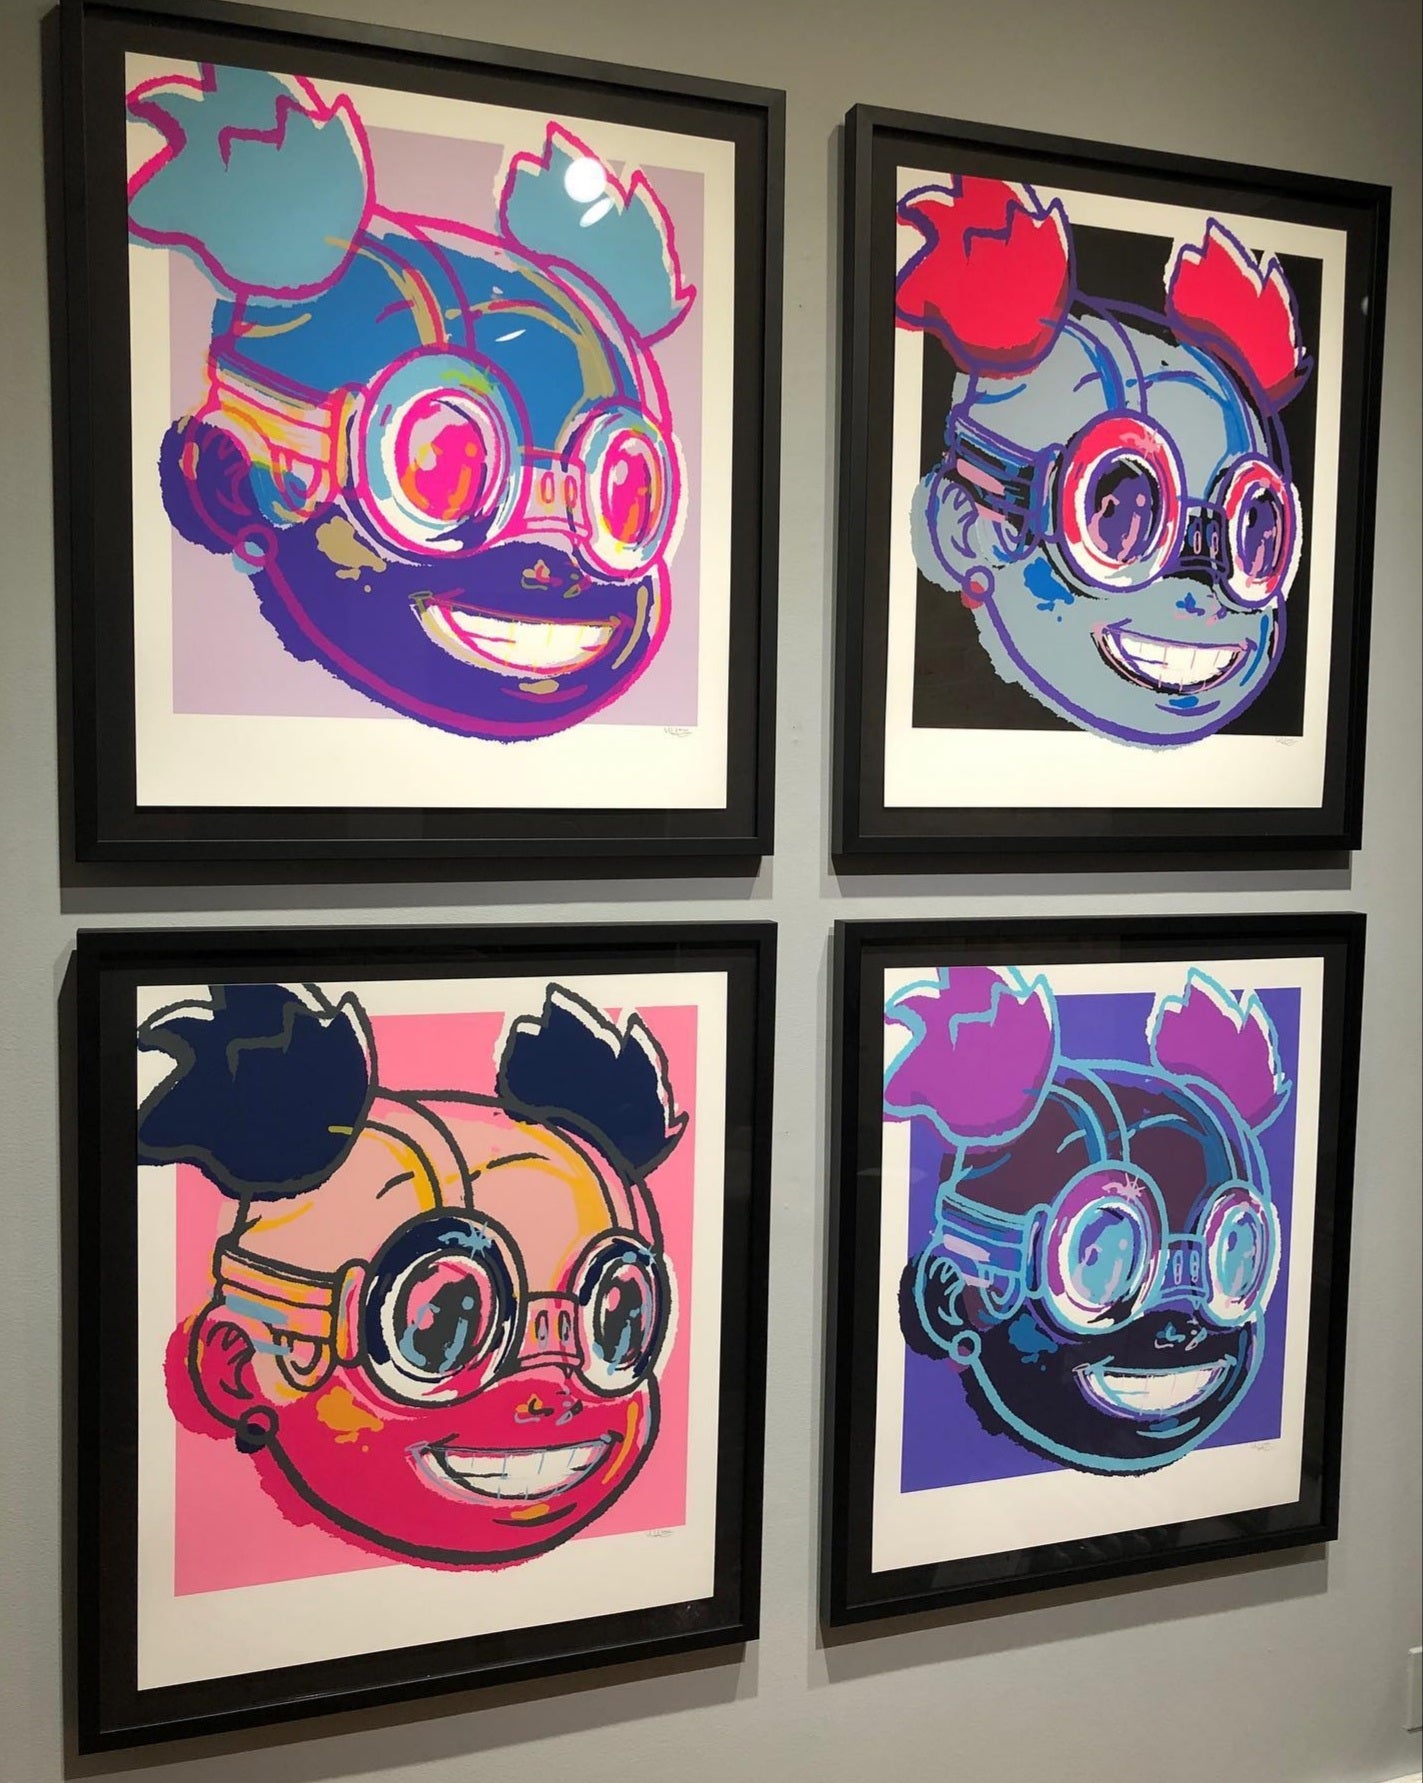 Title: "LILAC – Pink, Purple, Turquoise, Blue" Poster artist: Hebru Brantley Edition: xx/25 plus 5 A/P sets Type: Screen Print Size: 24" x 28"  Notes: Portfolio Edition of 25 plus 5 A/P sets  Includes four 24" x 28"  Prints come in a custom made portfolio box embossed with "LILAC: HEBRU BRANTLEY"  Each print is signed and numbered by Hebru Brantley.  Printed by POP!NK Editions for Vertical Gallery – 2020.